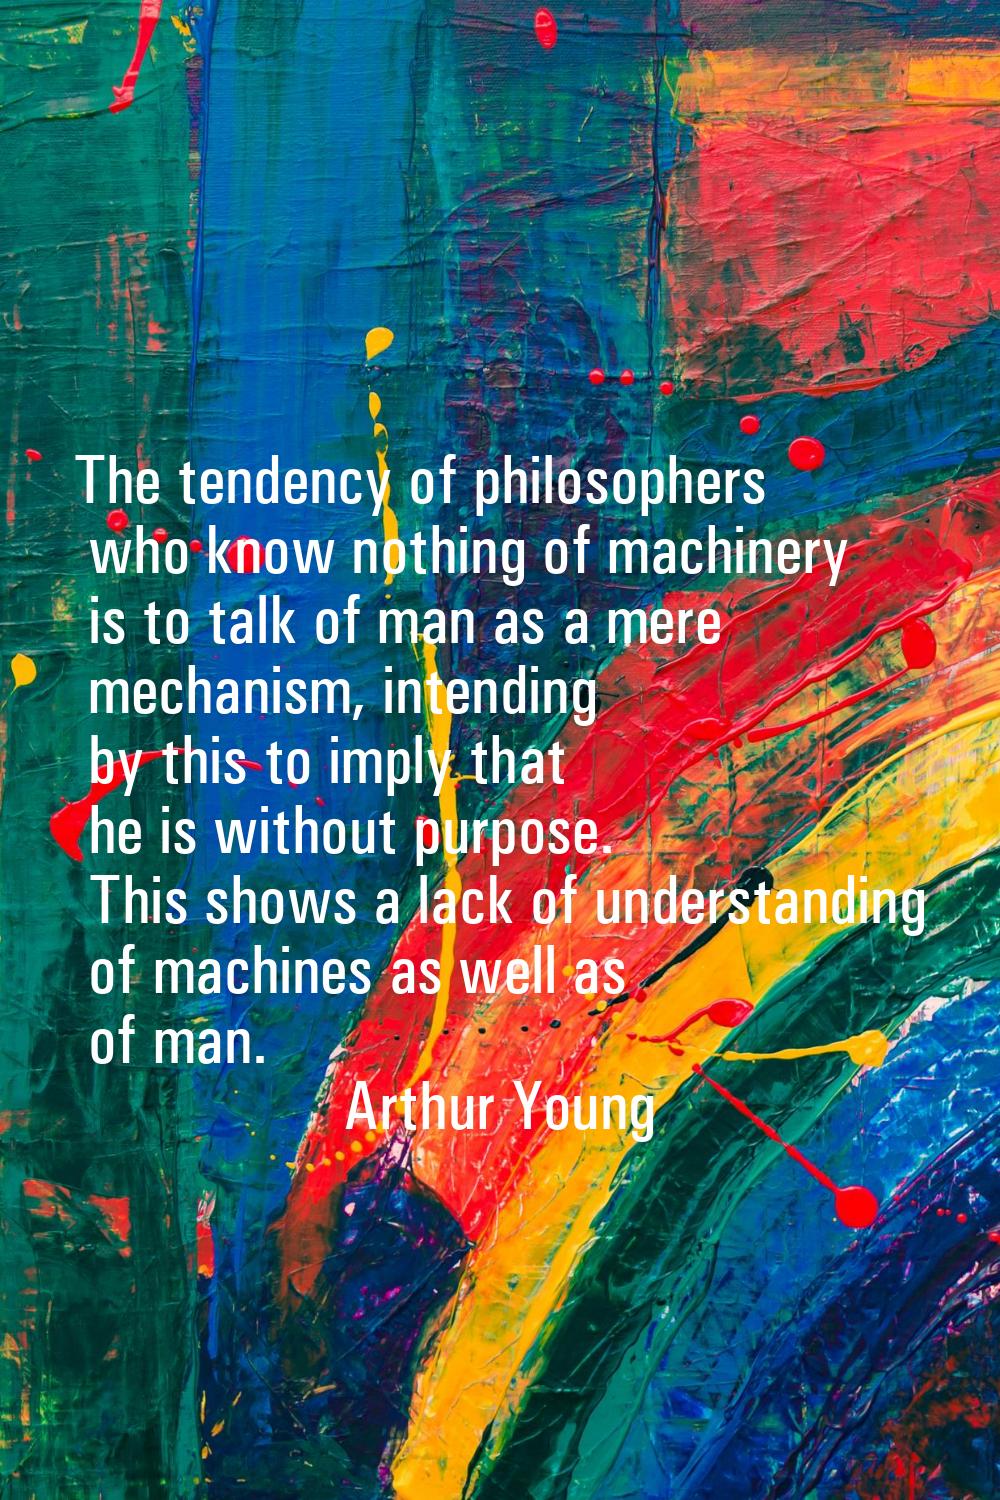 The tendency of philosophers who know nothing of machinery is to talk of man as a mere mechanism, i